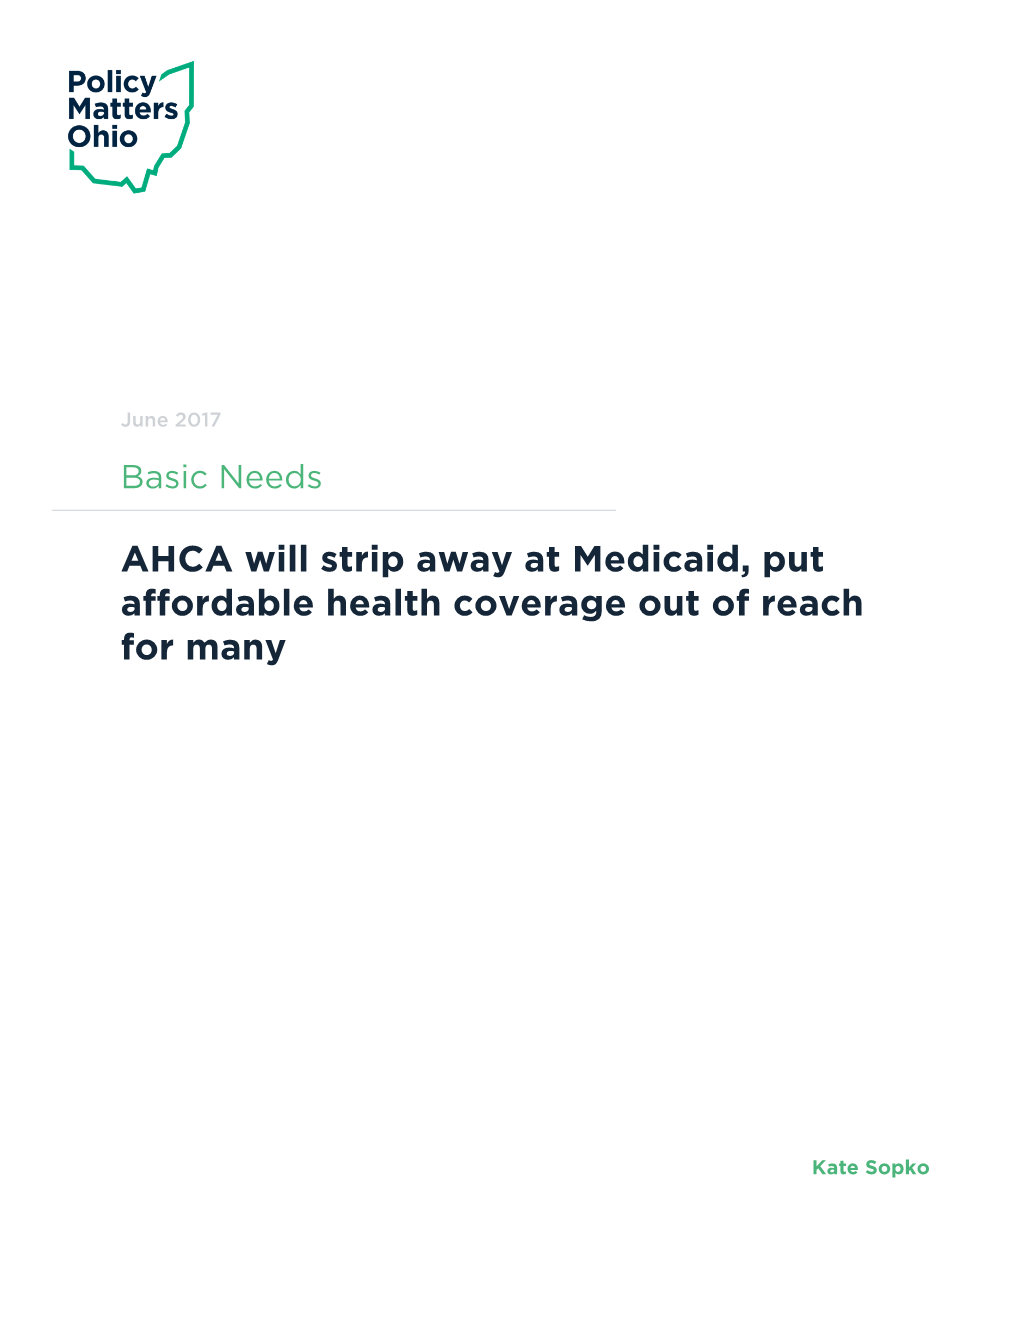 AHCA Will Strip Away at Medicaid, Put Affordable Health Coverage out of Reach for Many